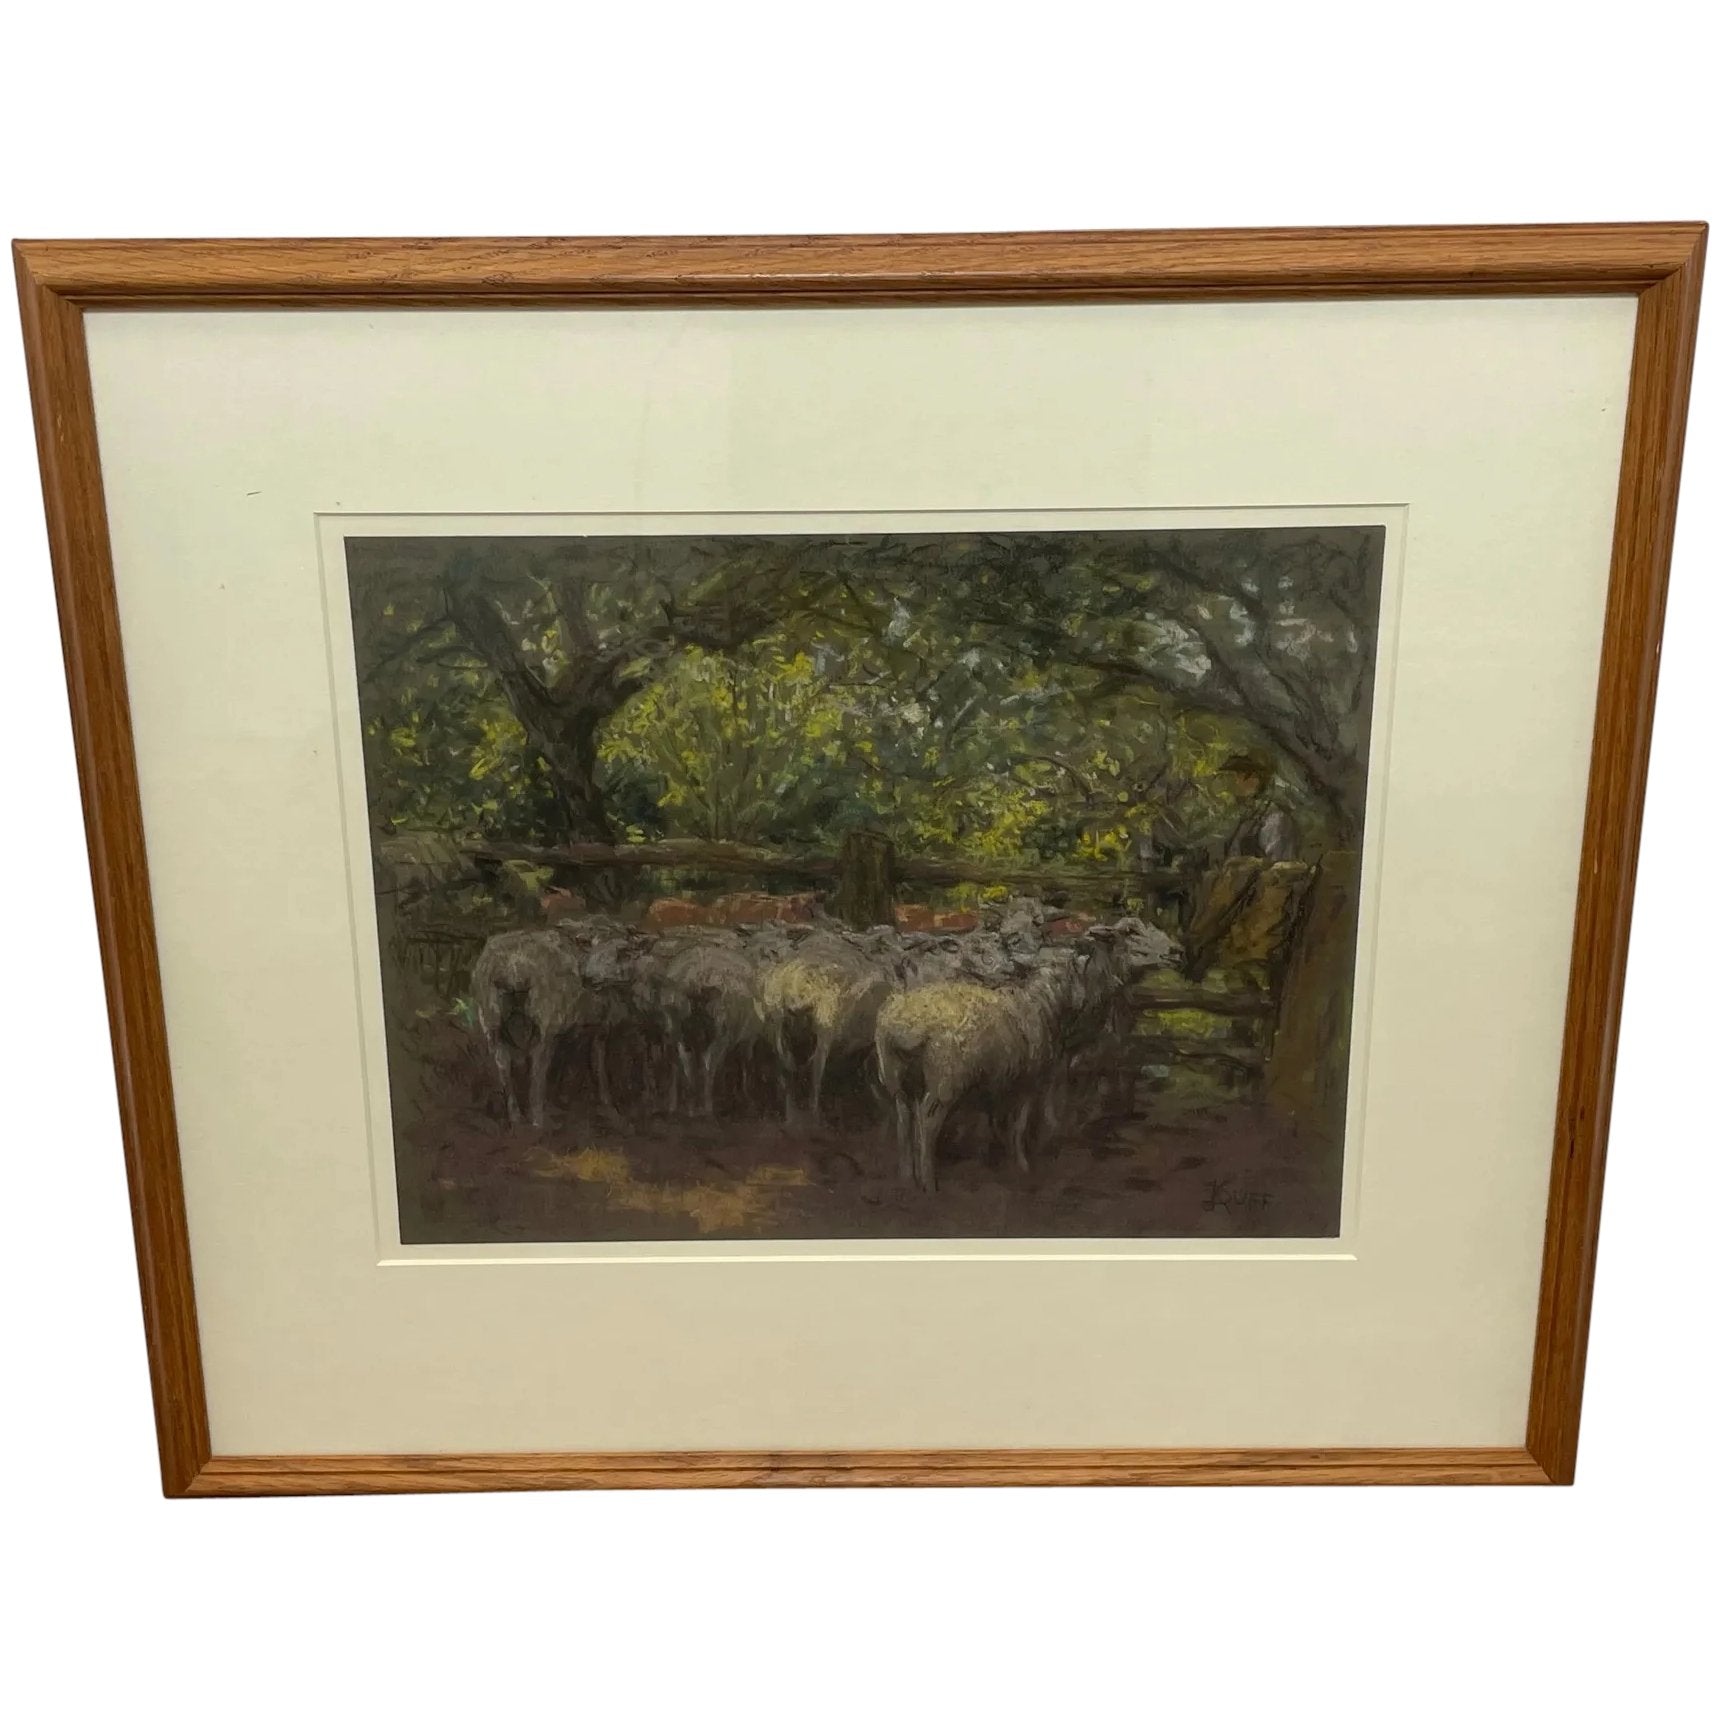 Edwardian Pastel Painting "The Sheepfold" By John Robert Keitley Duff RI RA RSE - Cheshire Antiques Consultant